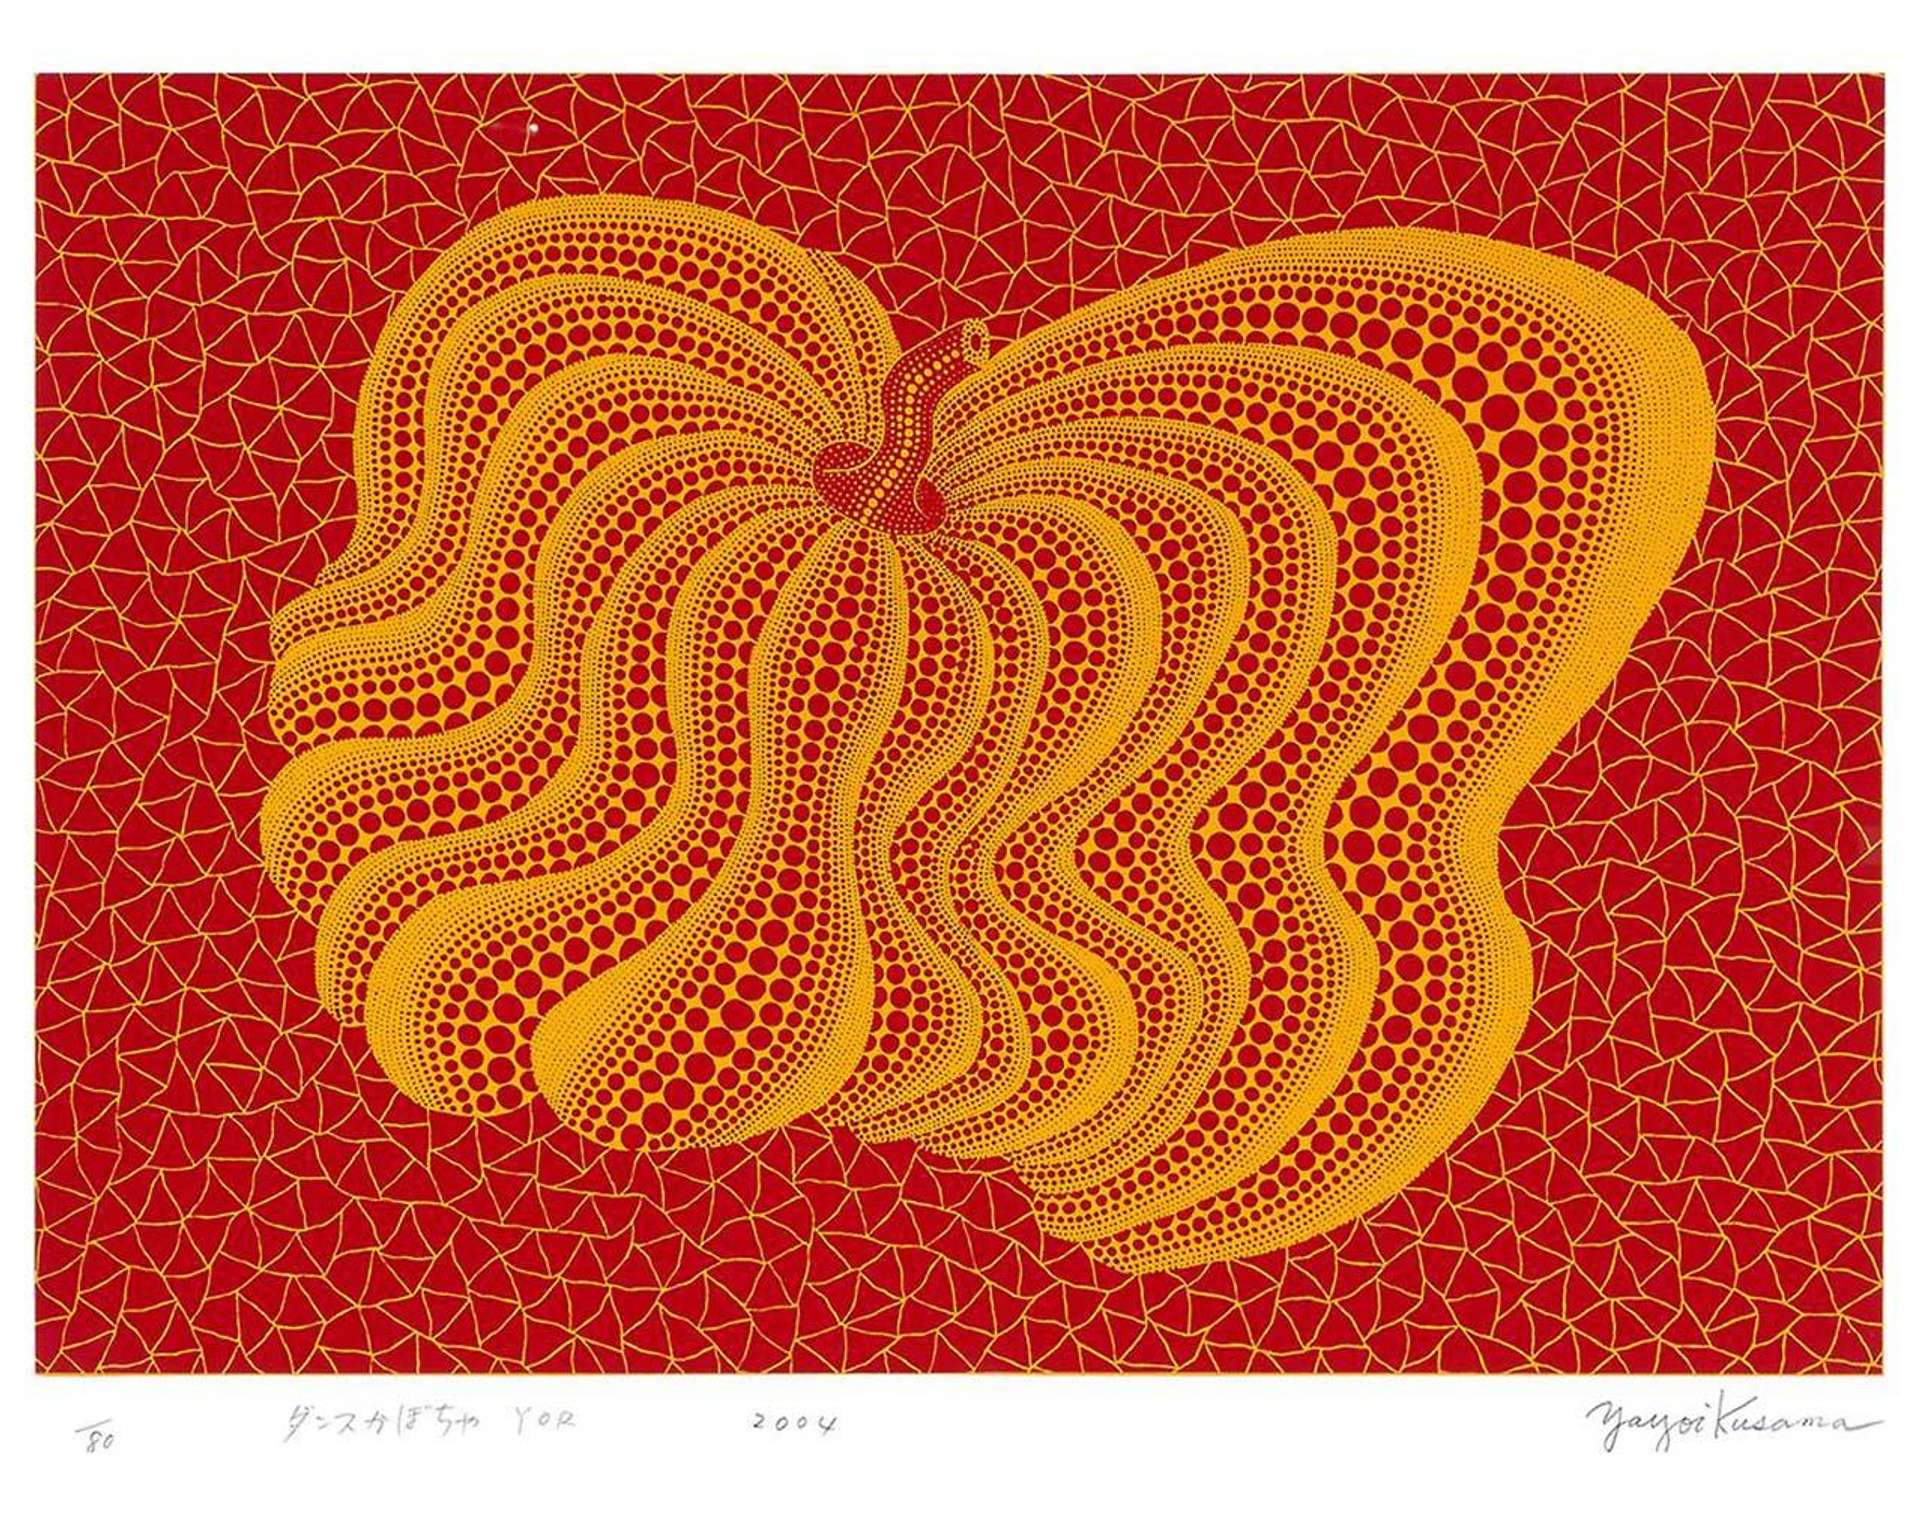 Yayoi Kusama’s Dancing Pumpkin (YOR), Kusama 321. A screenprint of a pumpkin created out of a pattern of red and yellow polka dots against a geometric patterned red background